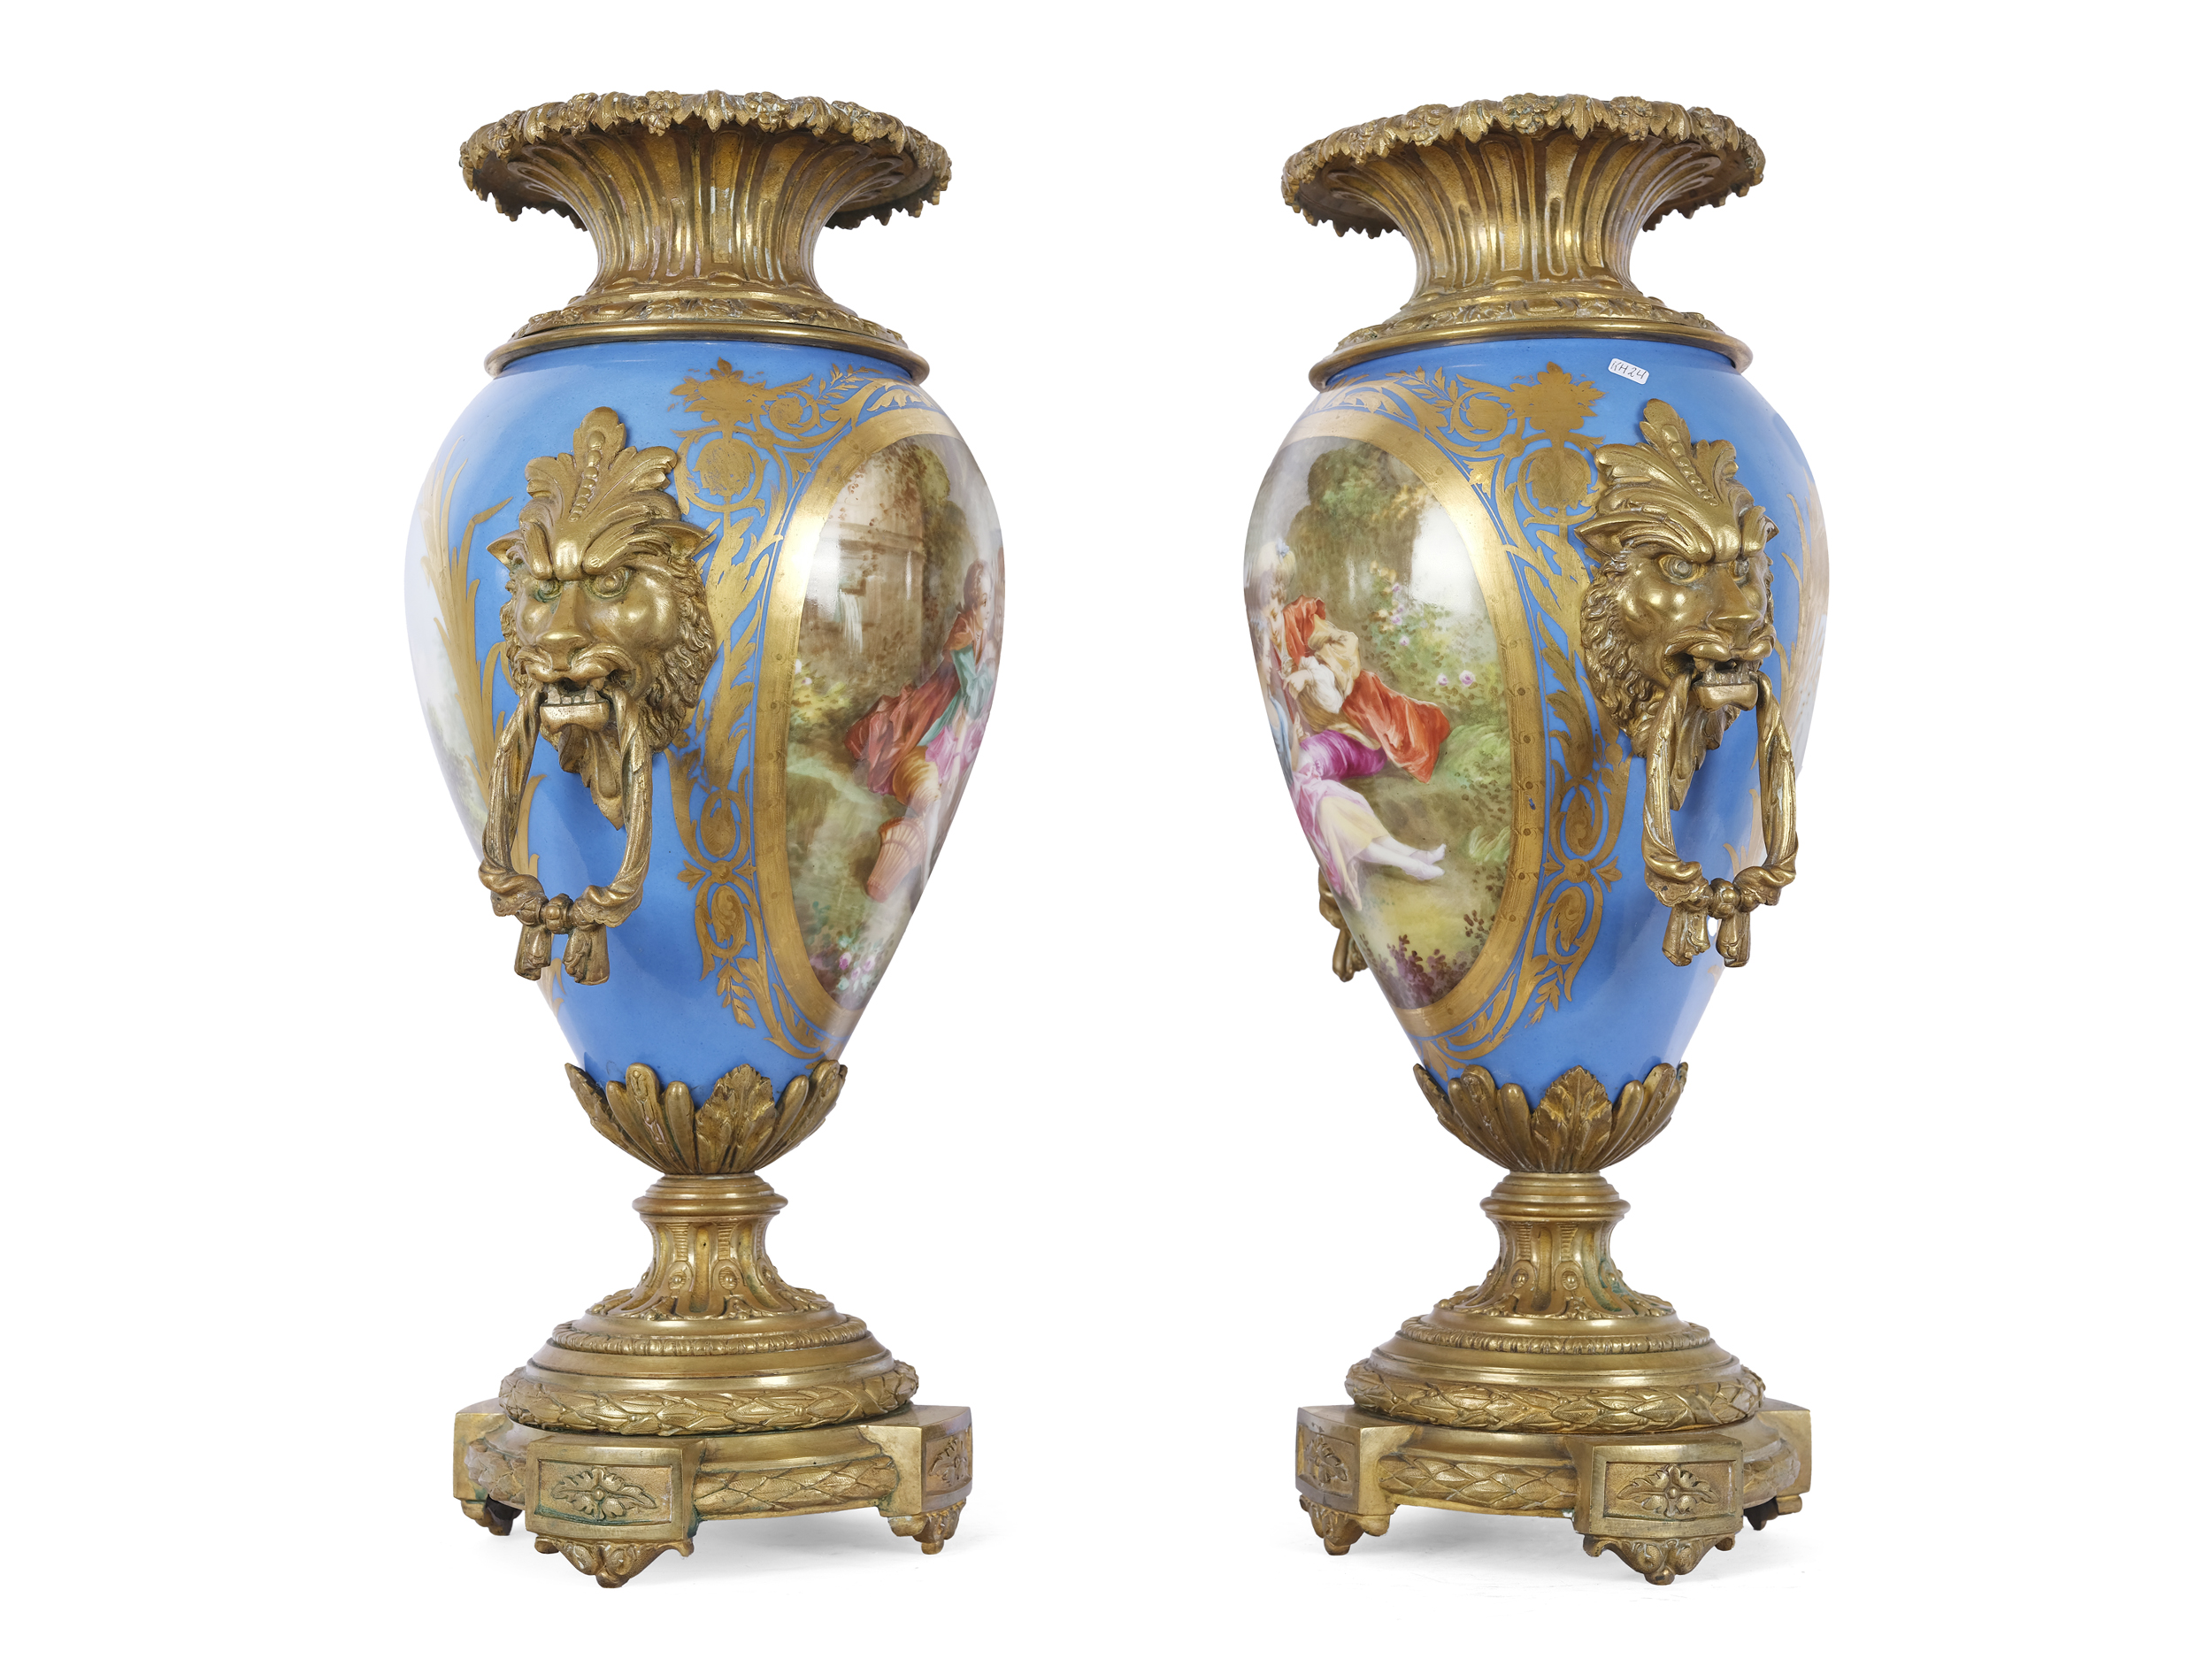 Pair of vases with Watteau scene, Sèvres, Paris, mid 19th century - Image 2 of 3